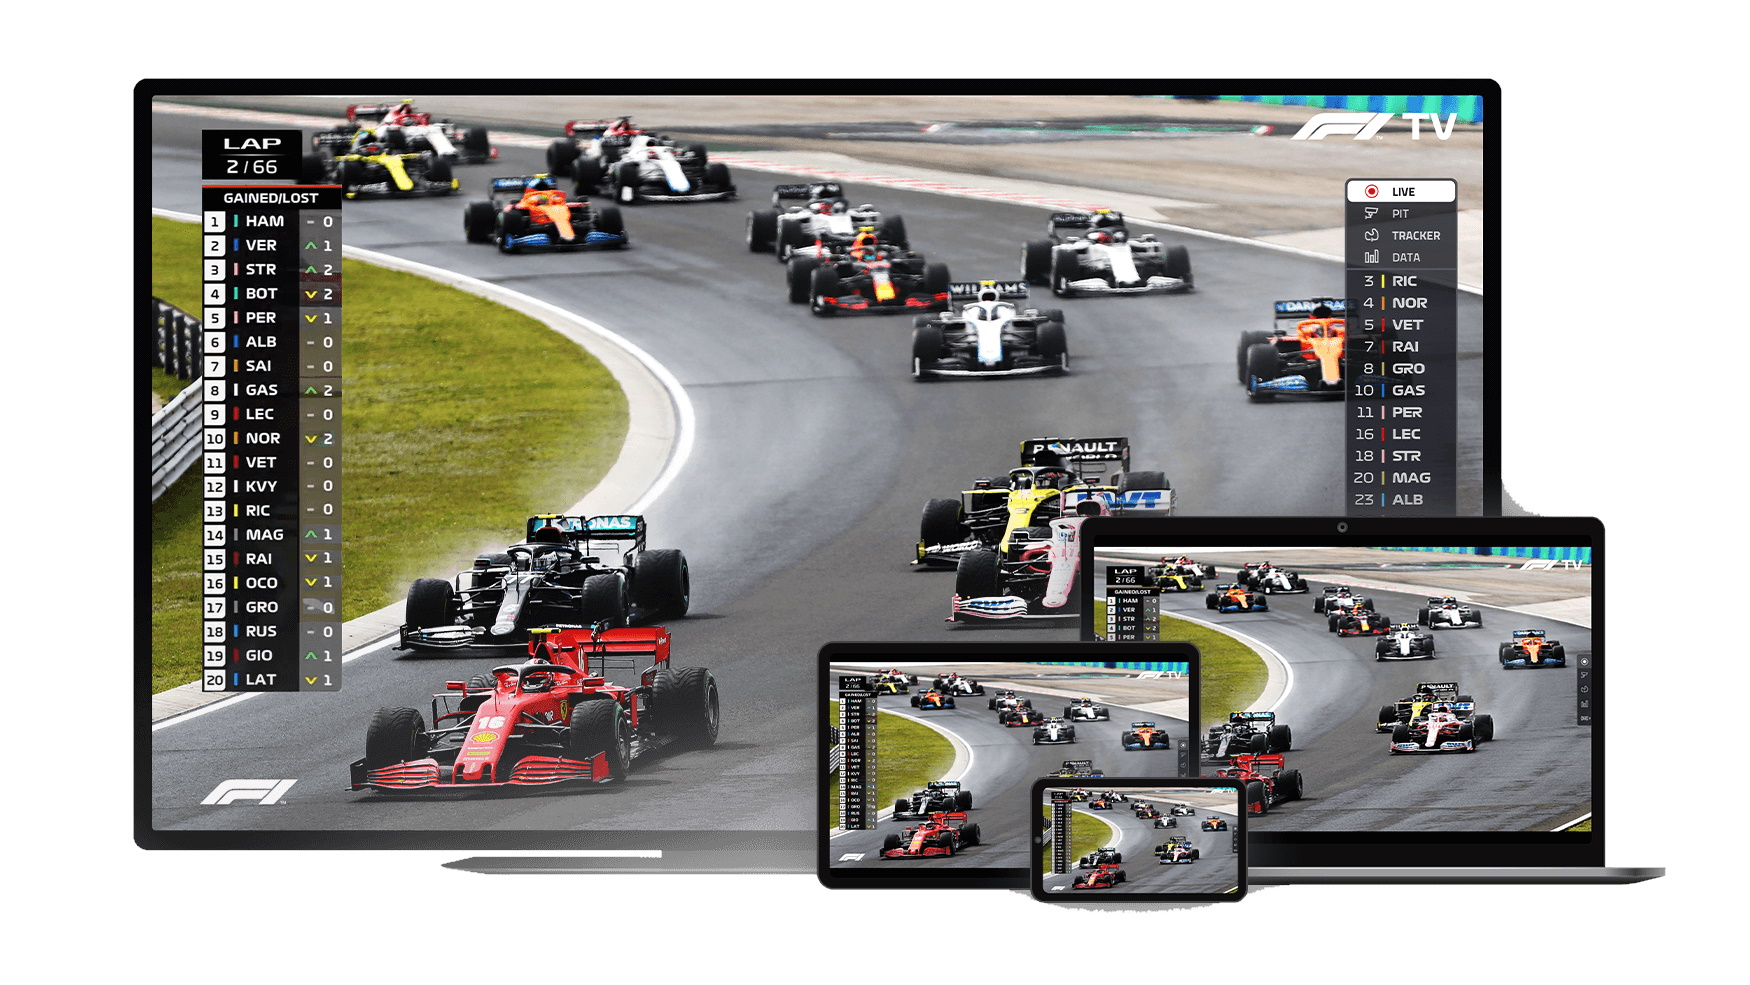 Watch F1 Online for free or through paid subscriptions